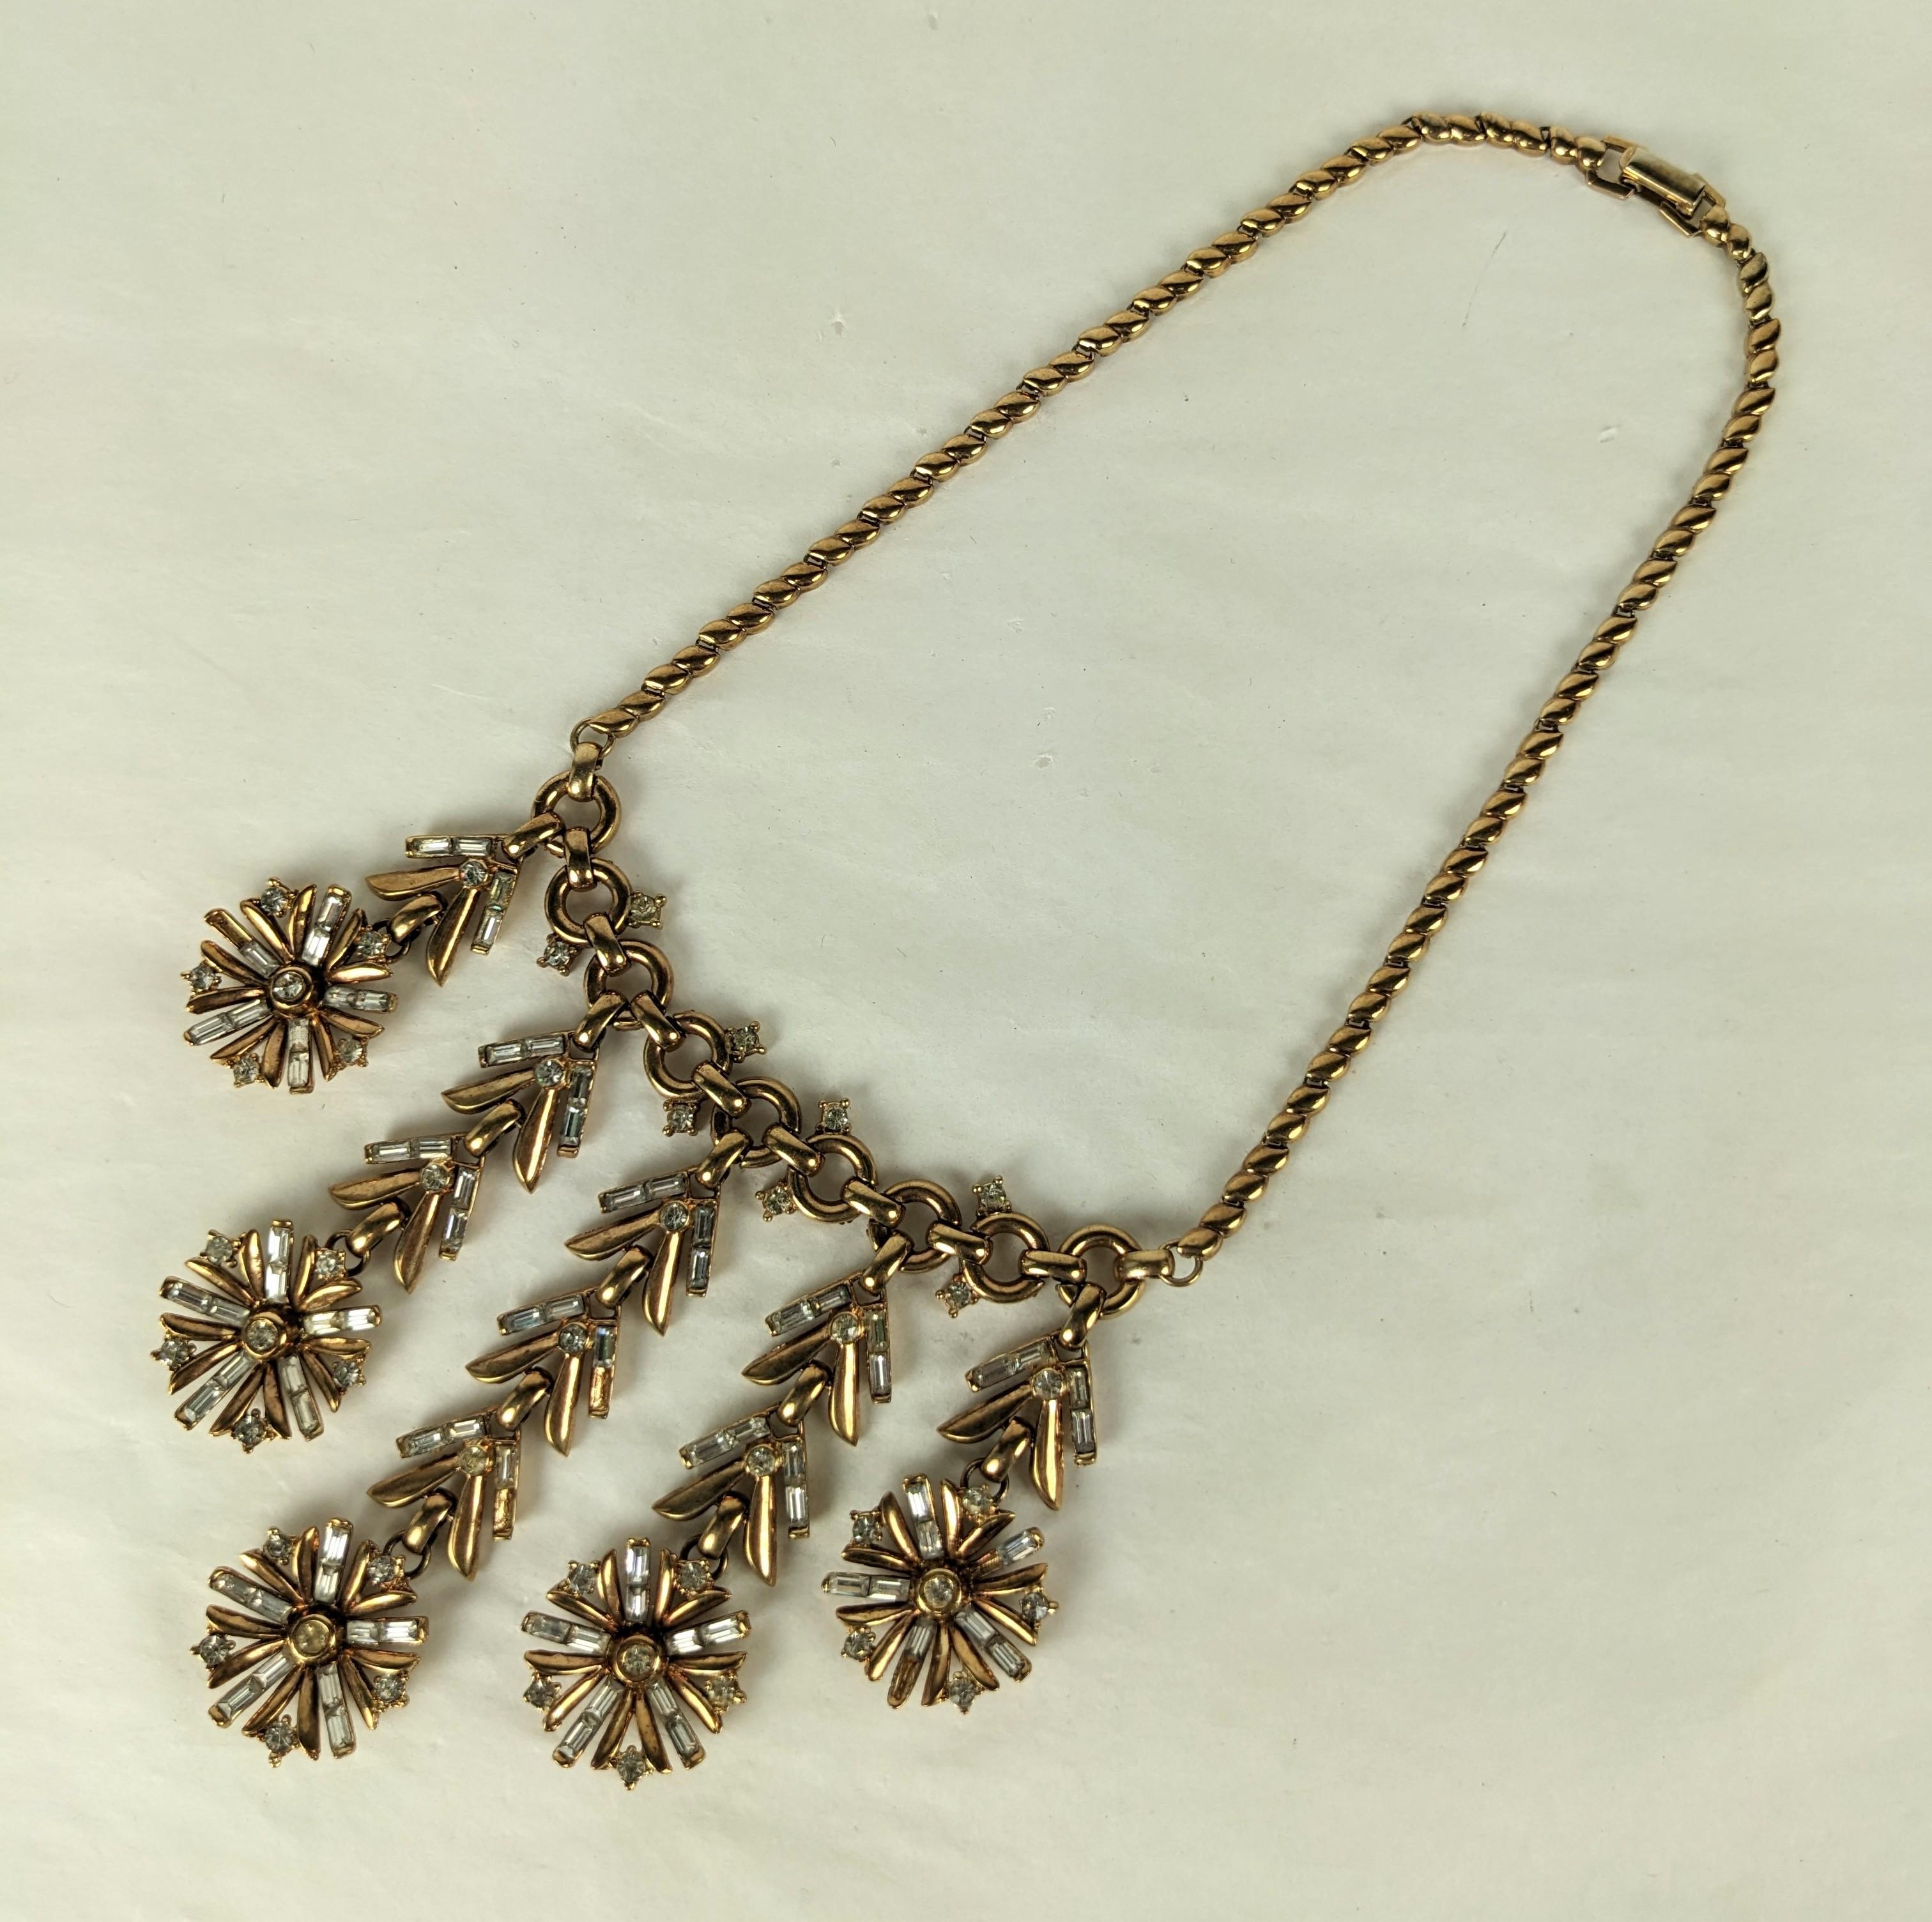 Dramatic Trifari Articulated Snowflake Necklace from the 1940's. Set in pinkish gold vermeil with crystal baguettes. Completely articulated drops. Necklace 15